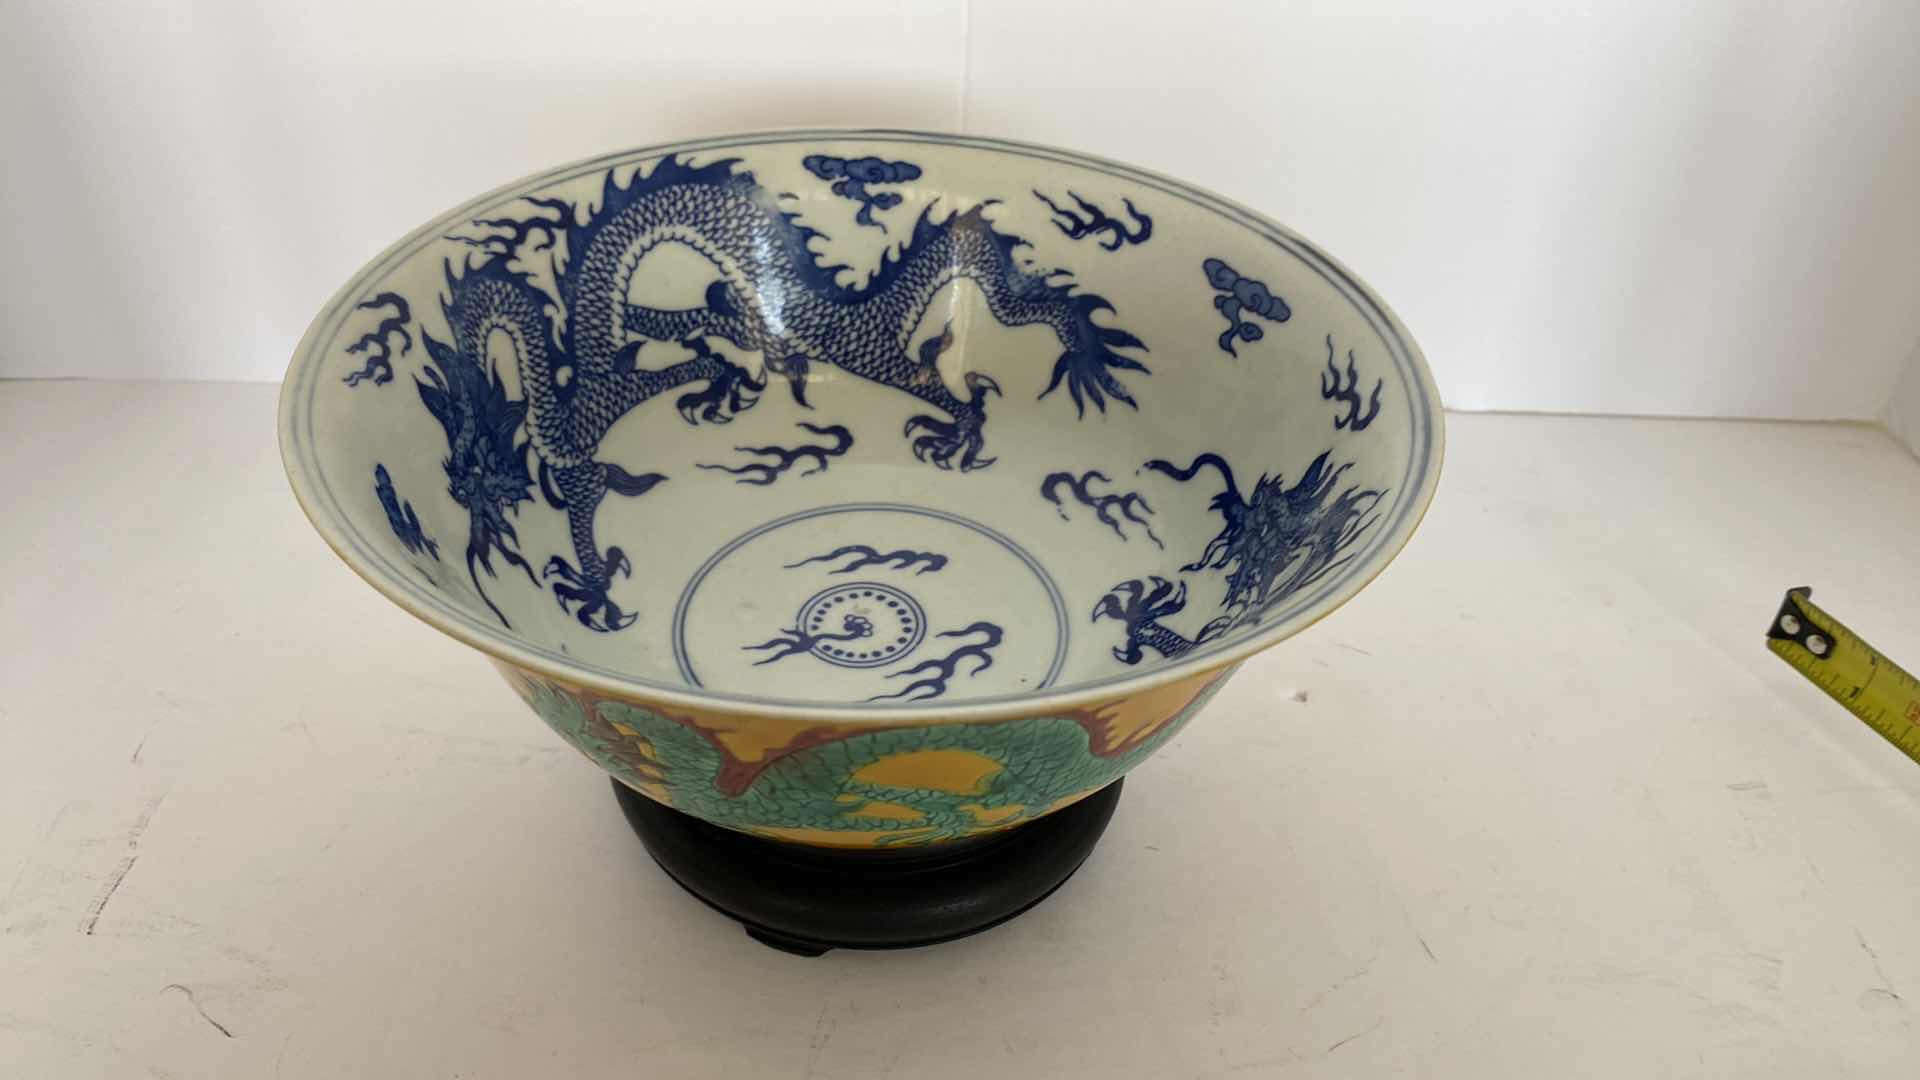 Photo 2 of REIN MARKS ON RARE KANGXI 1644 - 1912 YELLOW AND GREEN DRAGON WITH IMPERIAL BLUE DRAGON INTERIOR DIAMETER 8“ x 3“ ON STAND